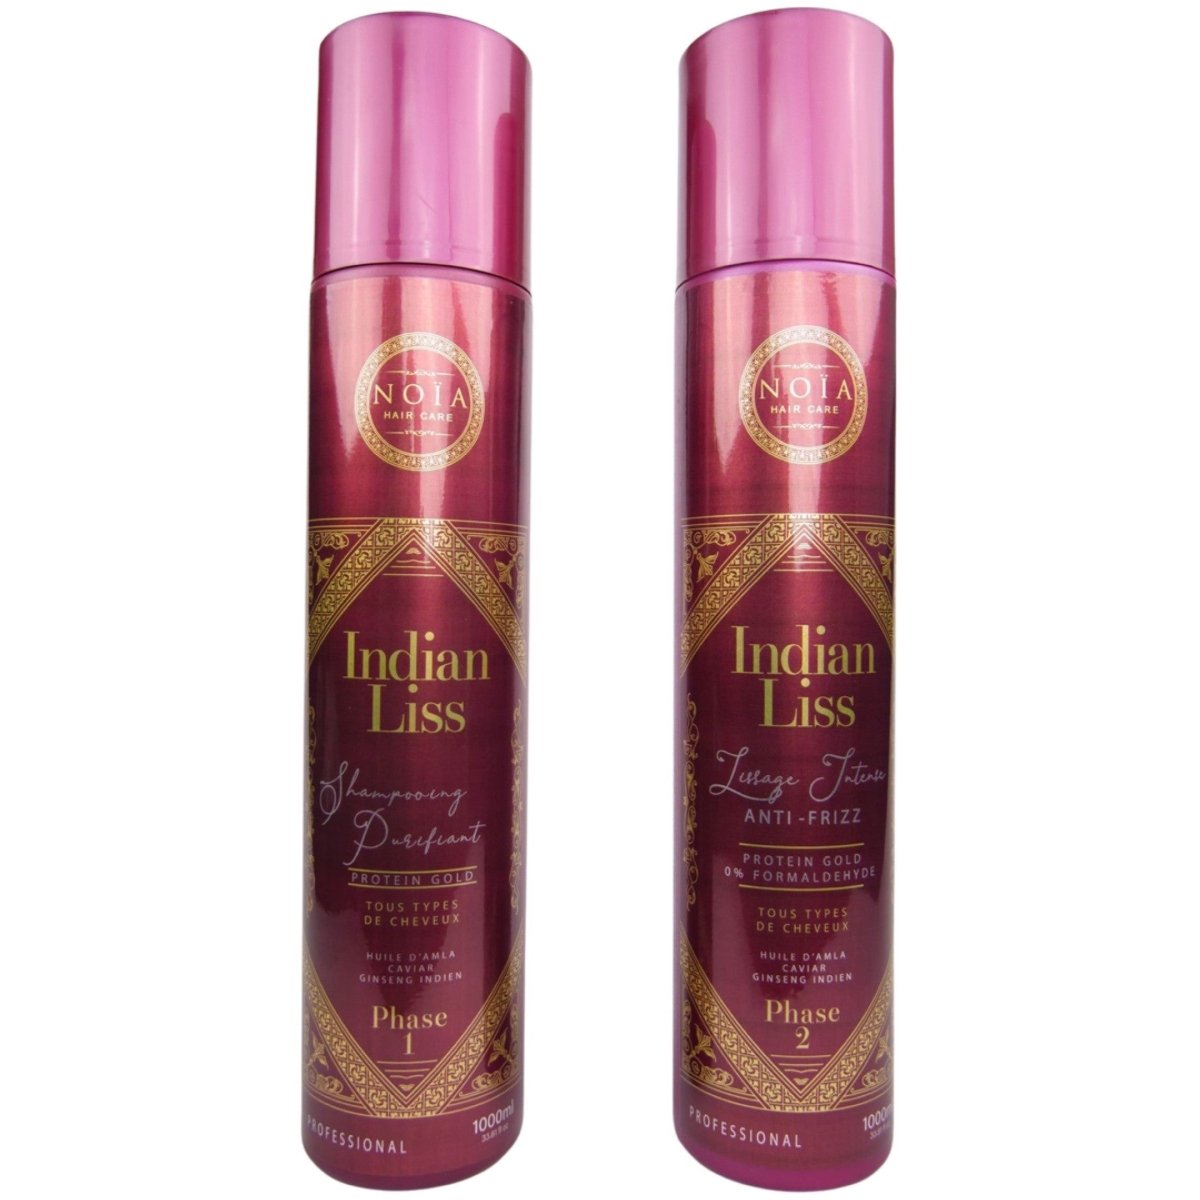 LISSAGE NOIA HAIR - INDIAN LISS -HUILE D'AMLA .CAVIAR & GINSENG INDIEN - PROTEIN GOLD - 2 X1000ML - BEAUTEPRICE LISSAGE NOIA HAIR - INDIAN LISS -HUILE D'AMLA .CAVIAR & GINSENG INDIEN - PROTEIN GOLD - 2 X1000ML NOÏA HAIR BEAUTEPRICE